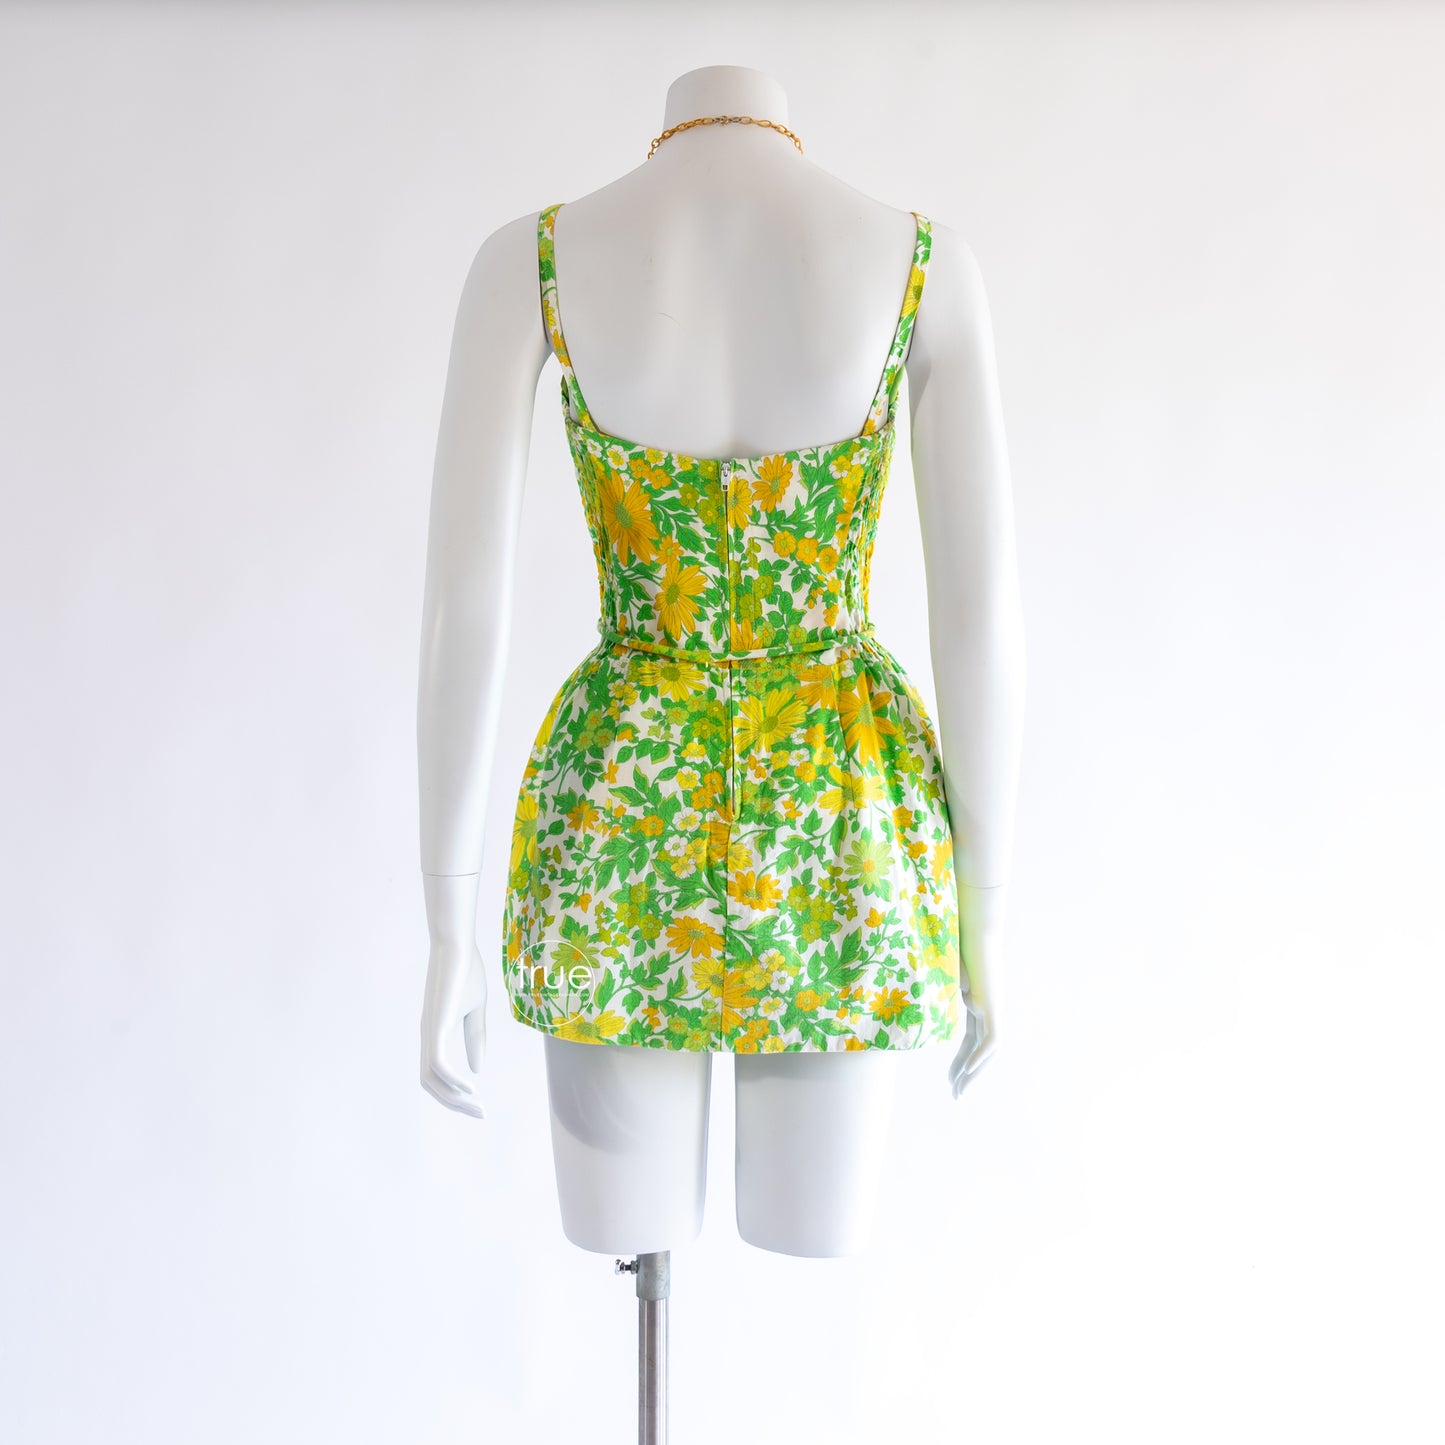 vintage 1960's romper ...fun COLE of California daisy print shorts convertible romper playsuit swimsuit